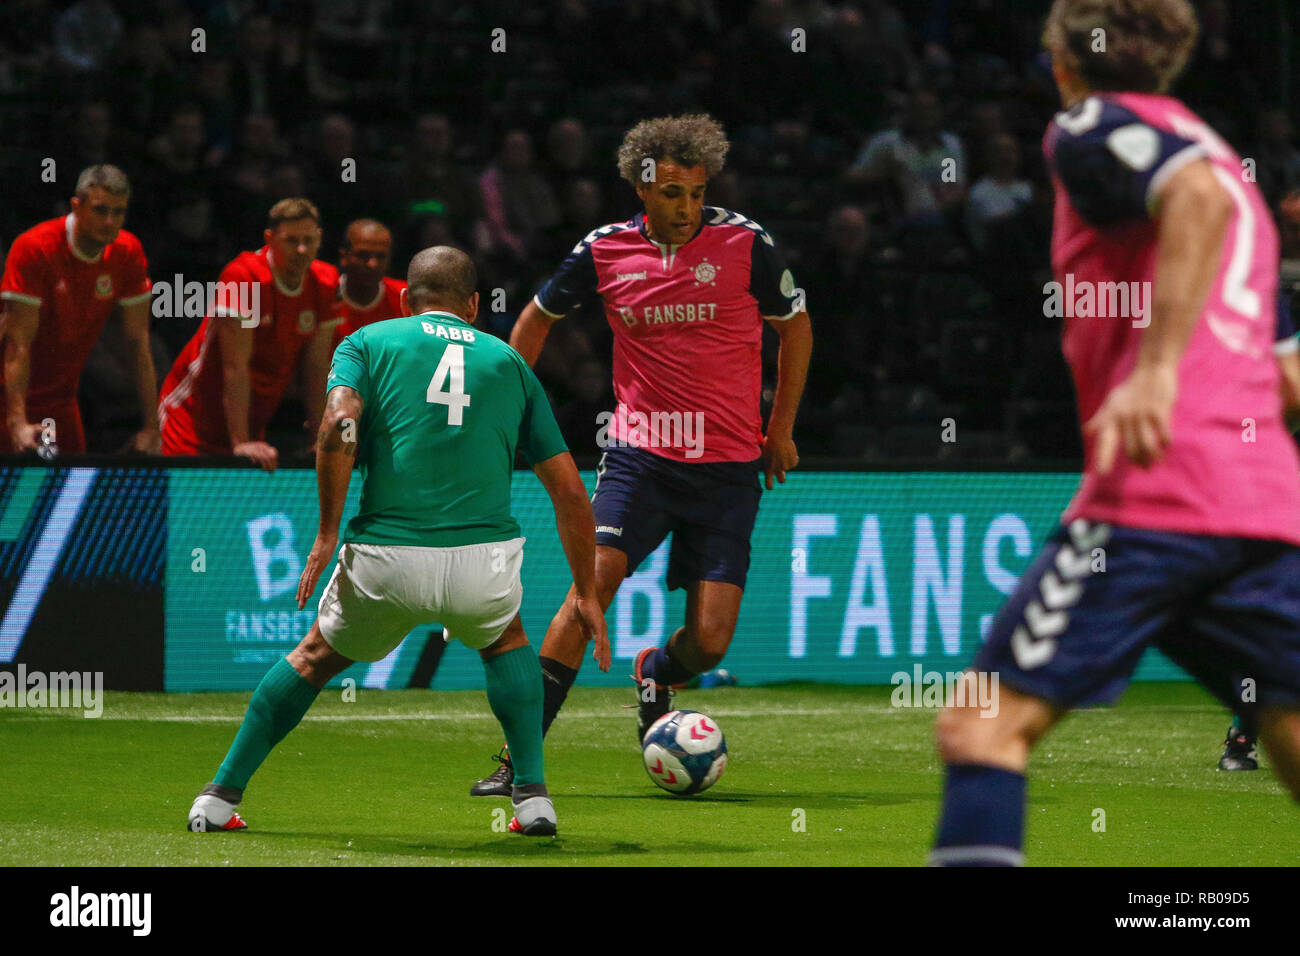 Glasgow, UK. 5th Jan 2019. Action from Day 2 of the FansBet Star Sixes Tournament at the SSE Hydro in Glasgow.   Game 1 - Rest Of the World Vs Republic Of Ireland Pierre Van Hooijdonk takes on Phil Babb during the Star Sixes Tournament in Glasgow Credit: Colin Poultney/Alamy Live News Stock Photo